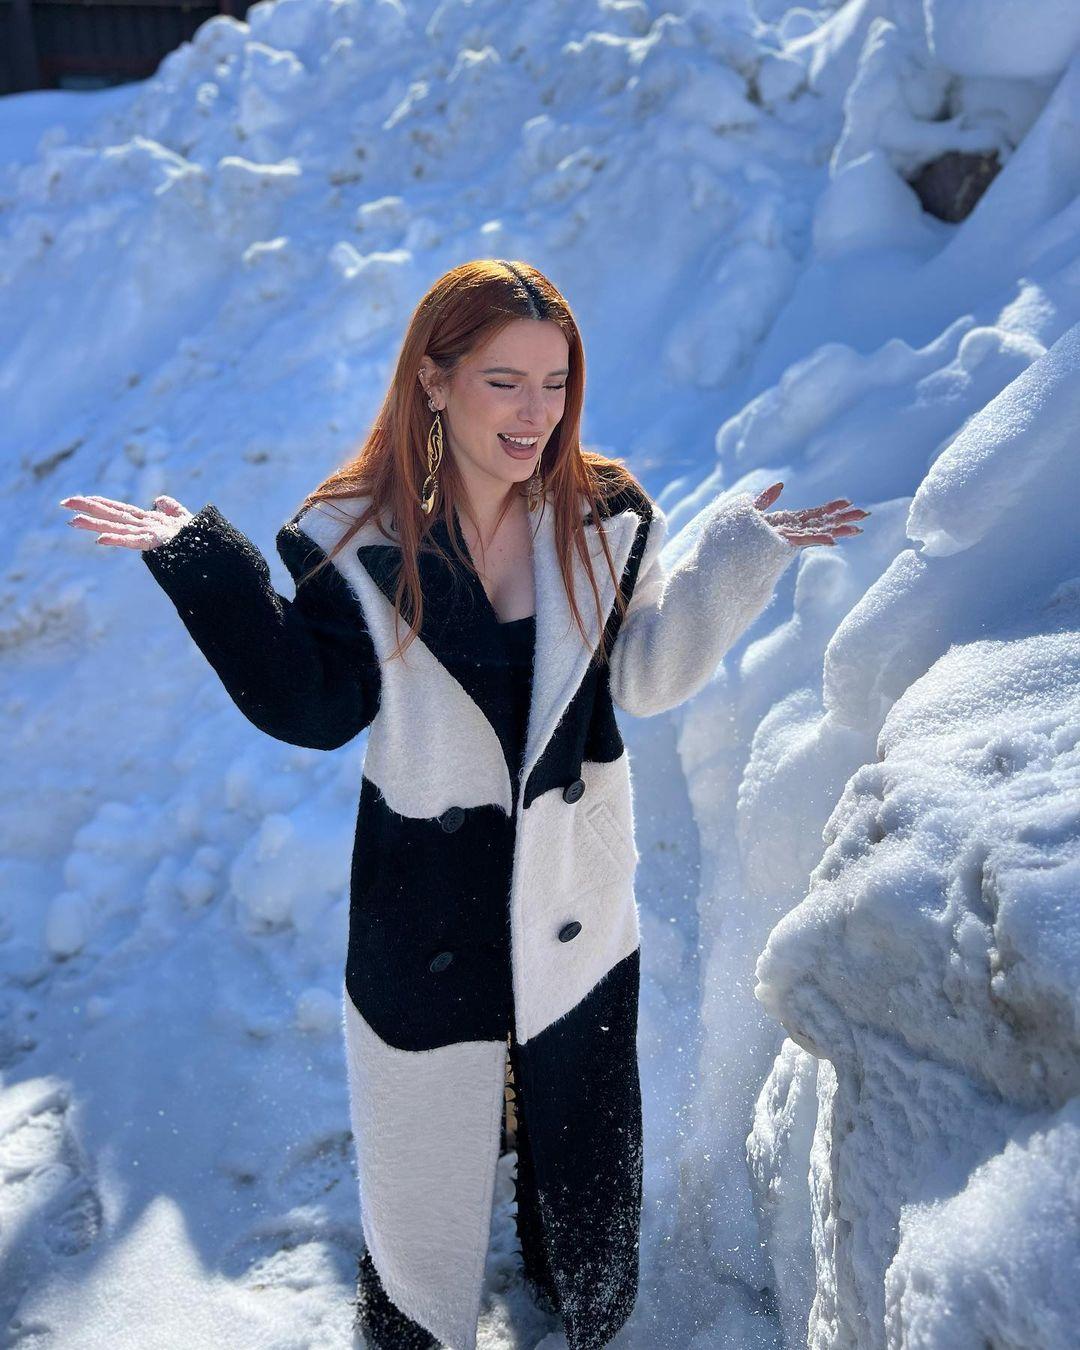 Bella Thorne plays in snow